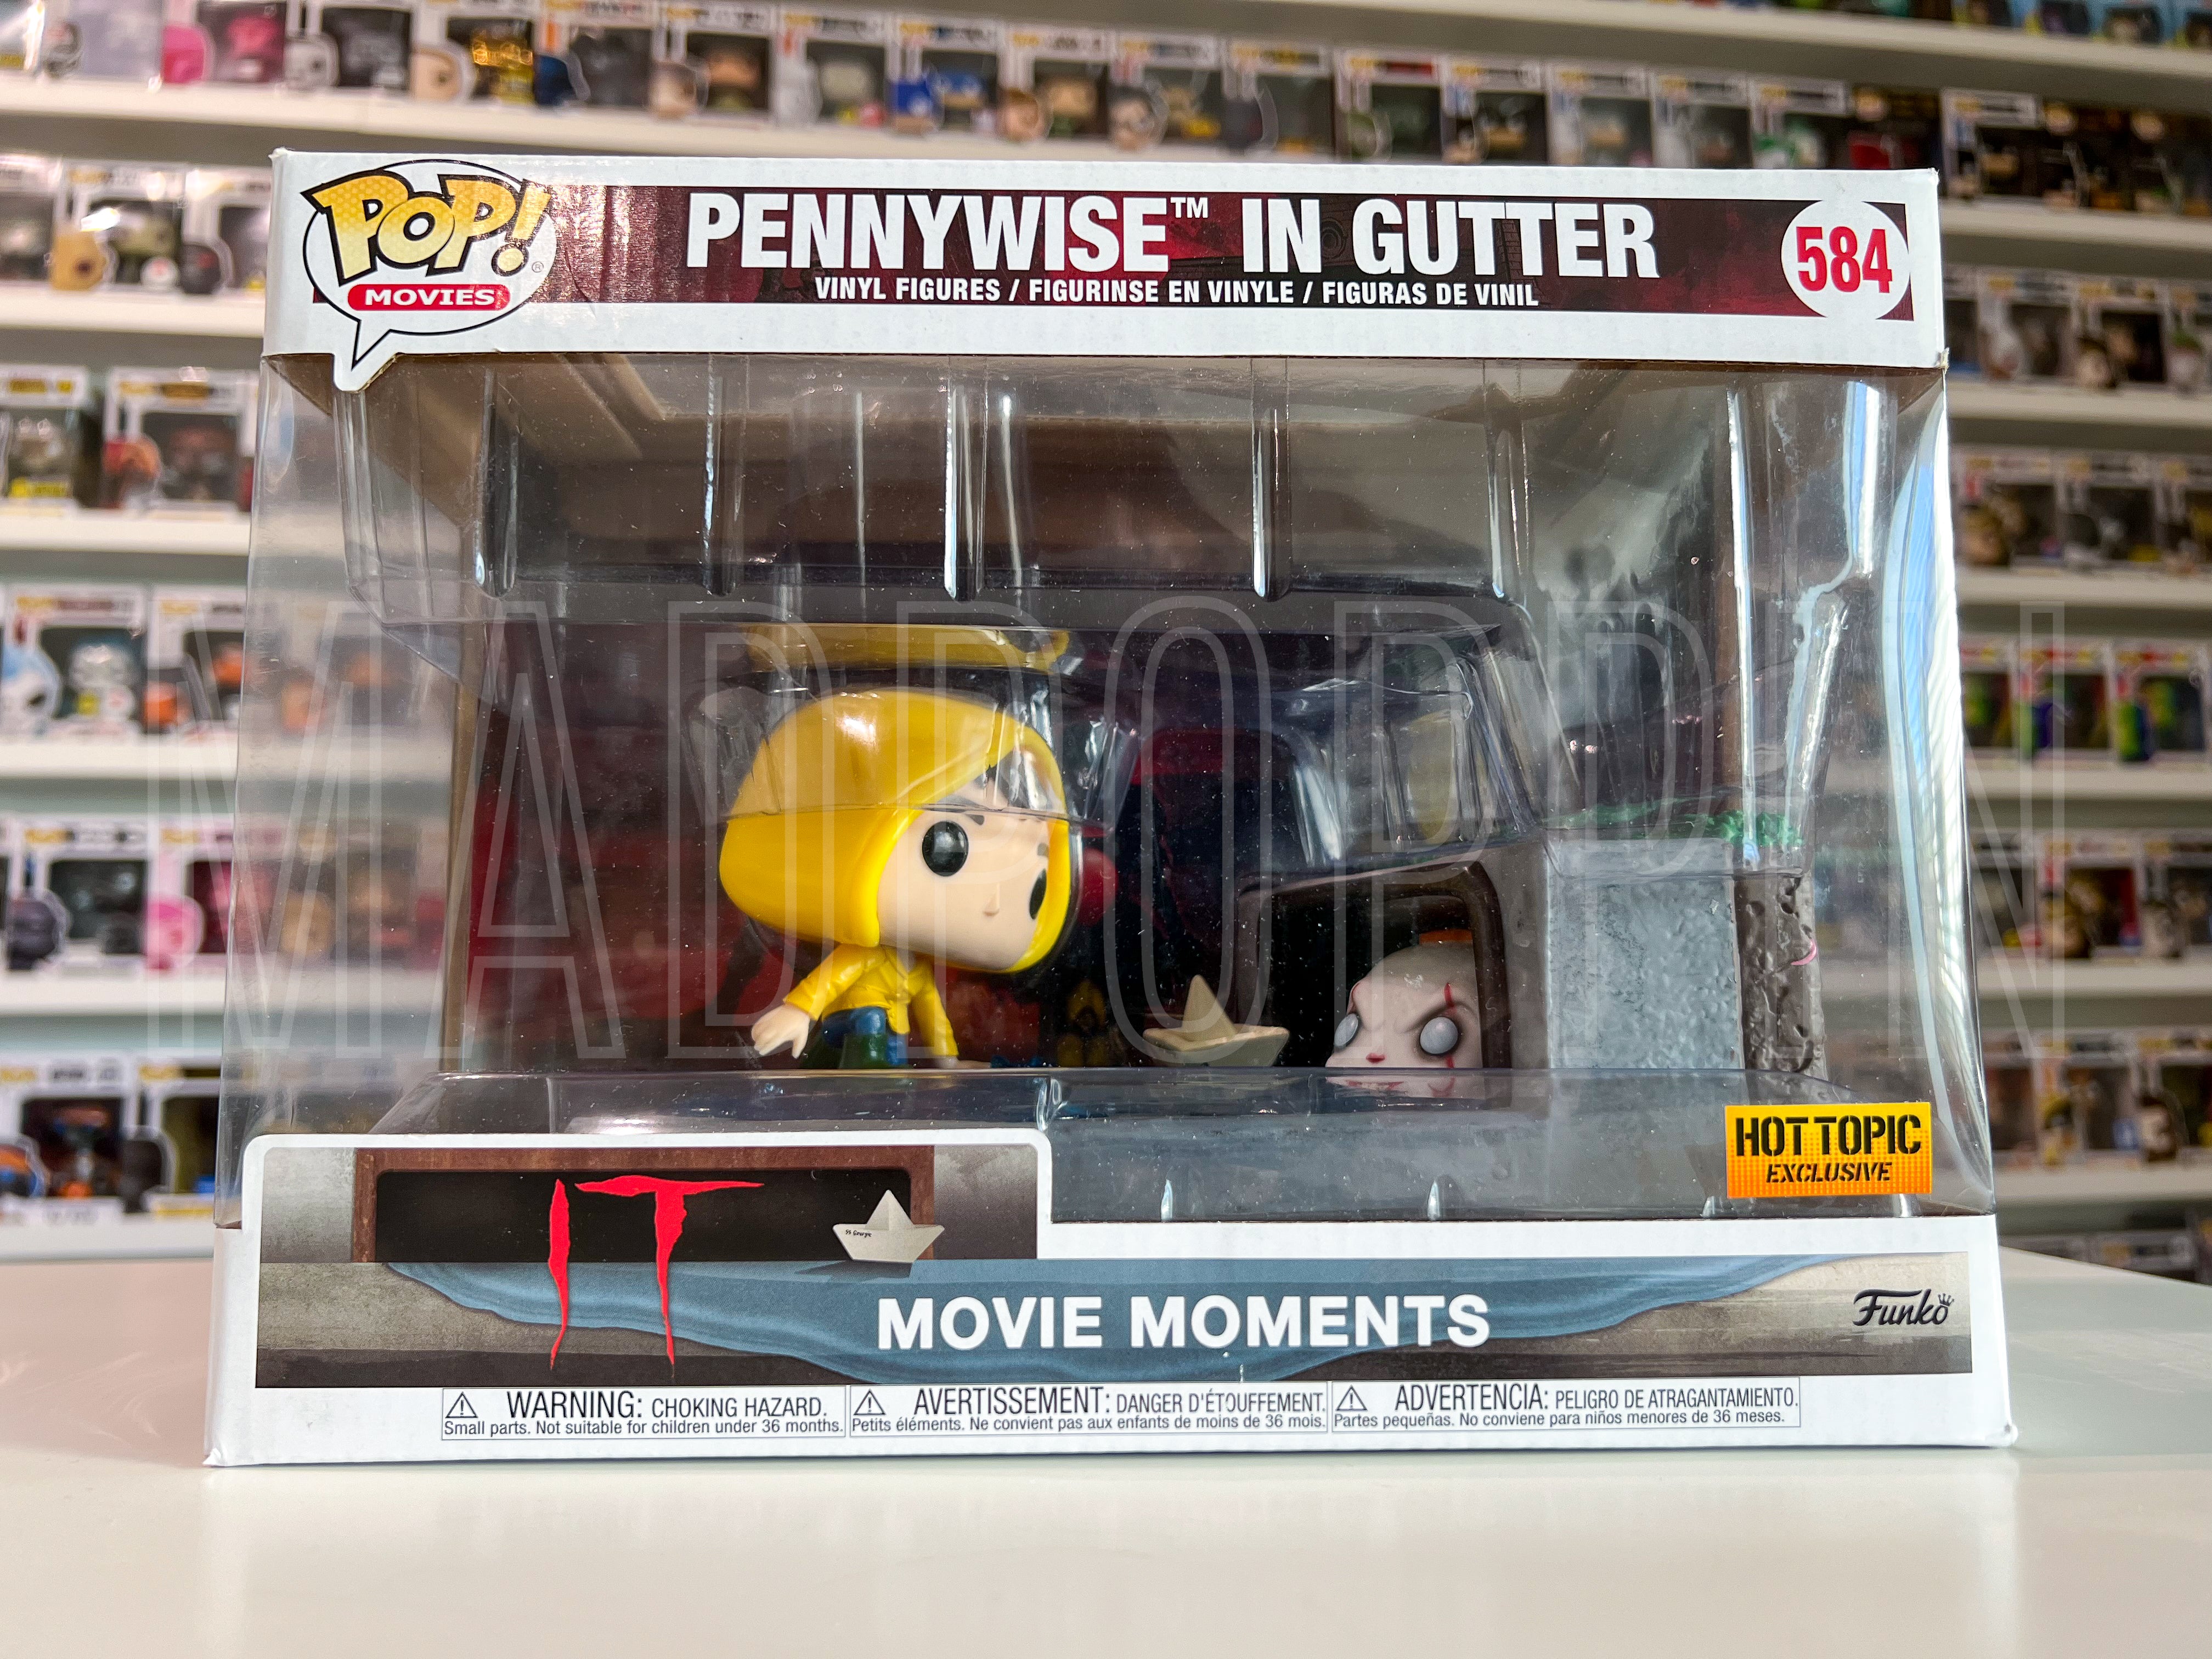 POP! Movie Moment: It - Pennywise in Gutter